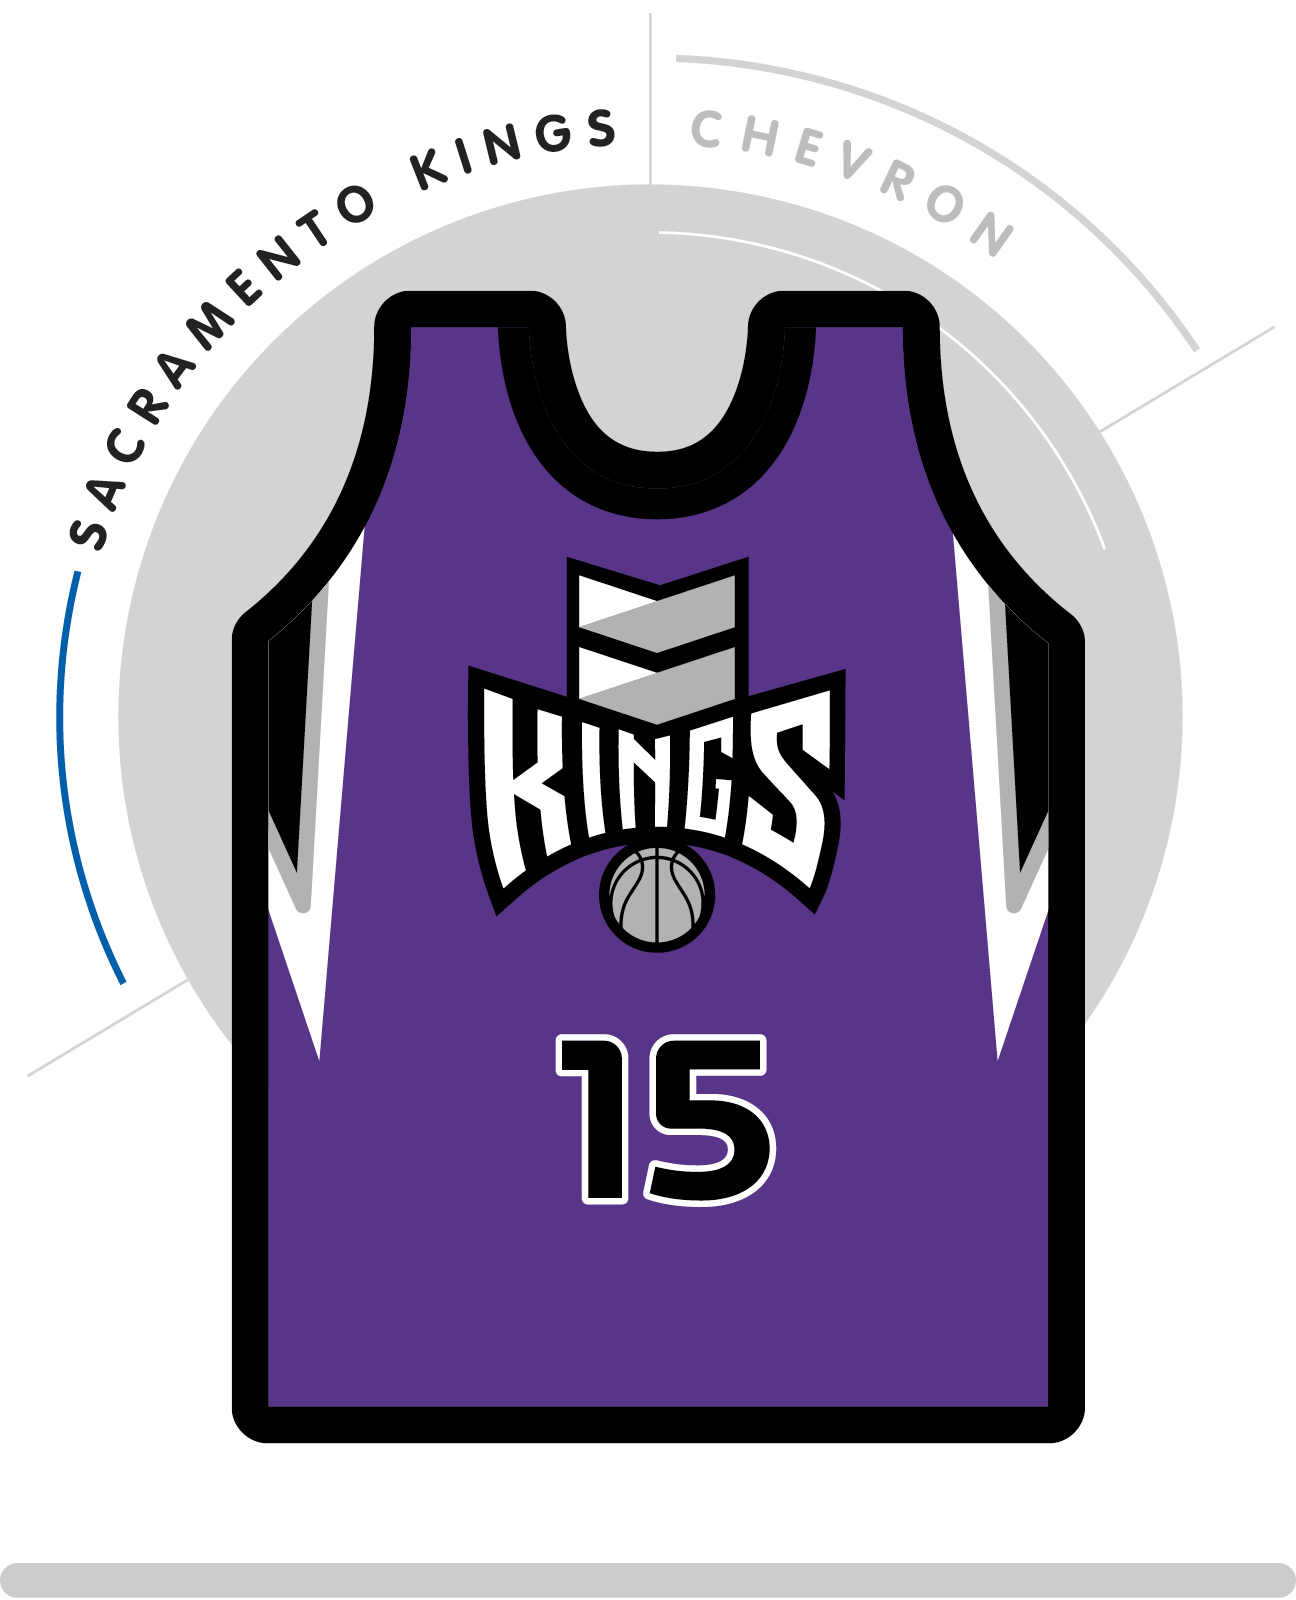 An in-depth look at NBA jerseys with full advertising